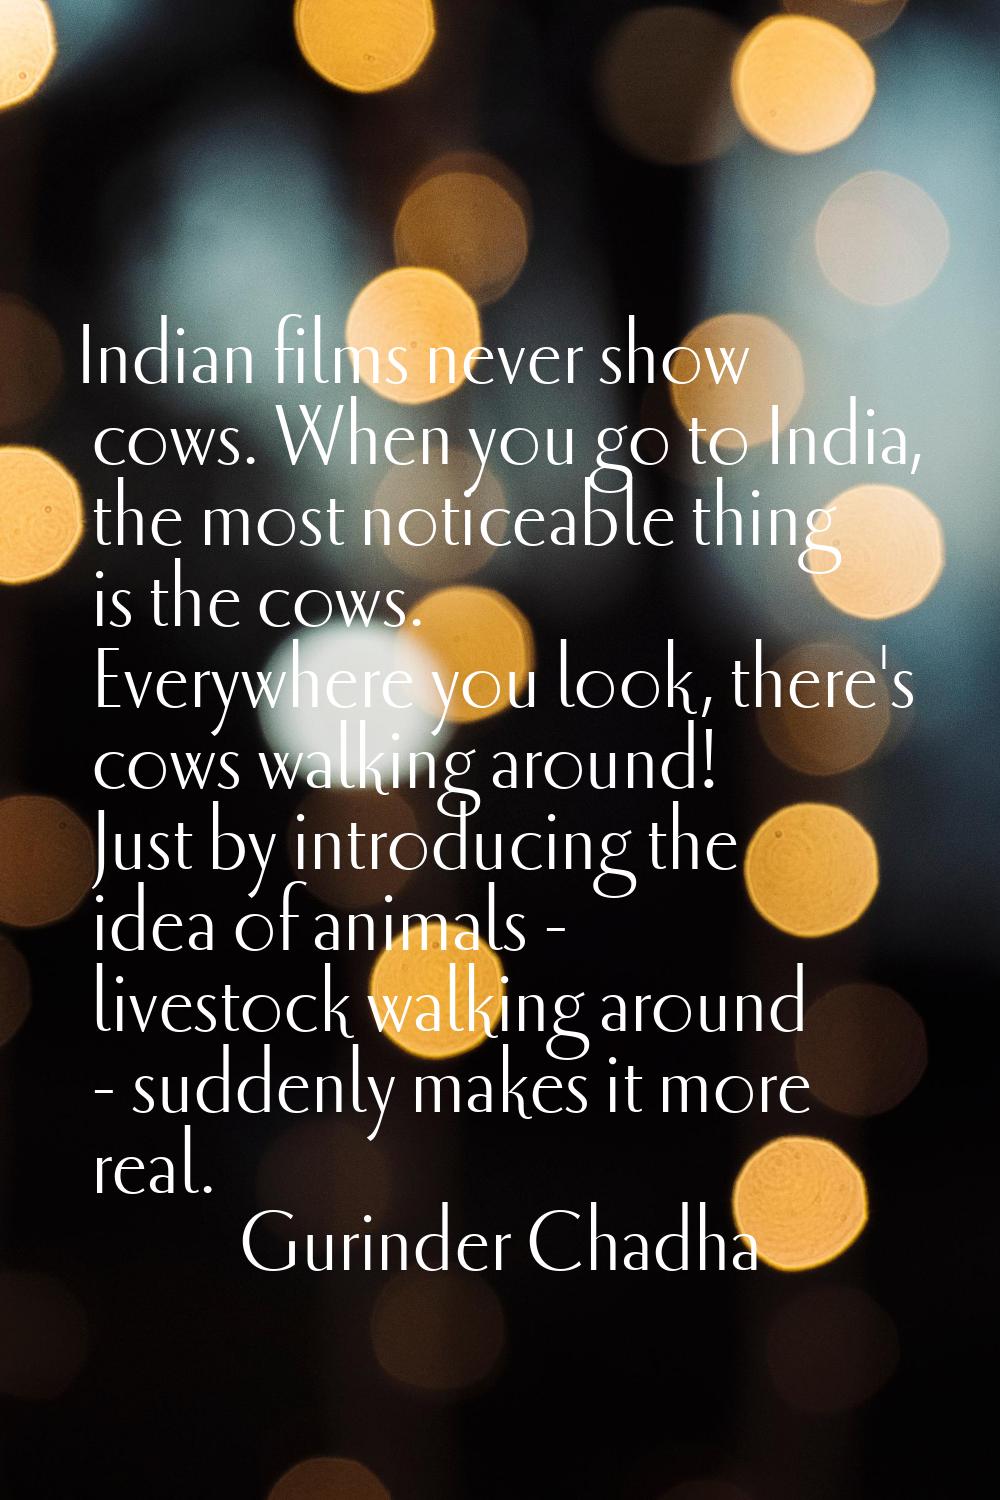 Indian films never show cows. When you go to India, the most noticeable thing is the cows. Everywhe